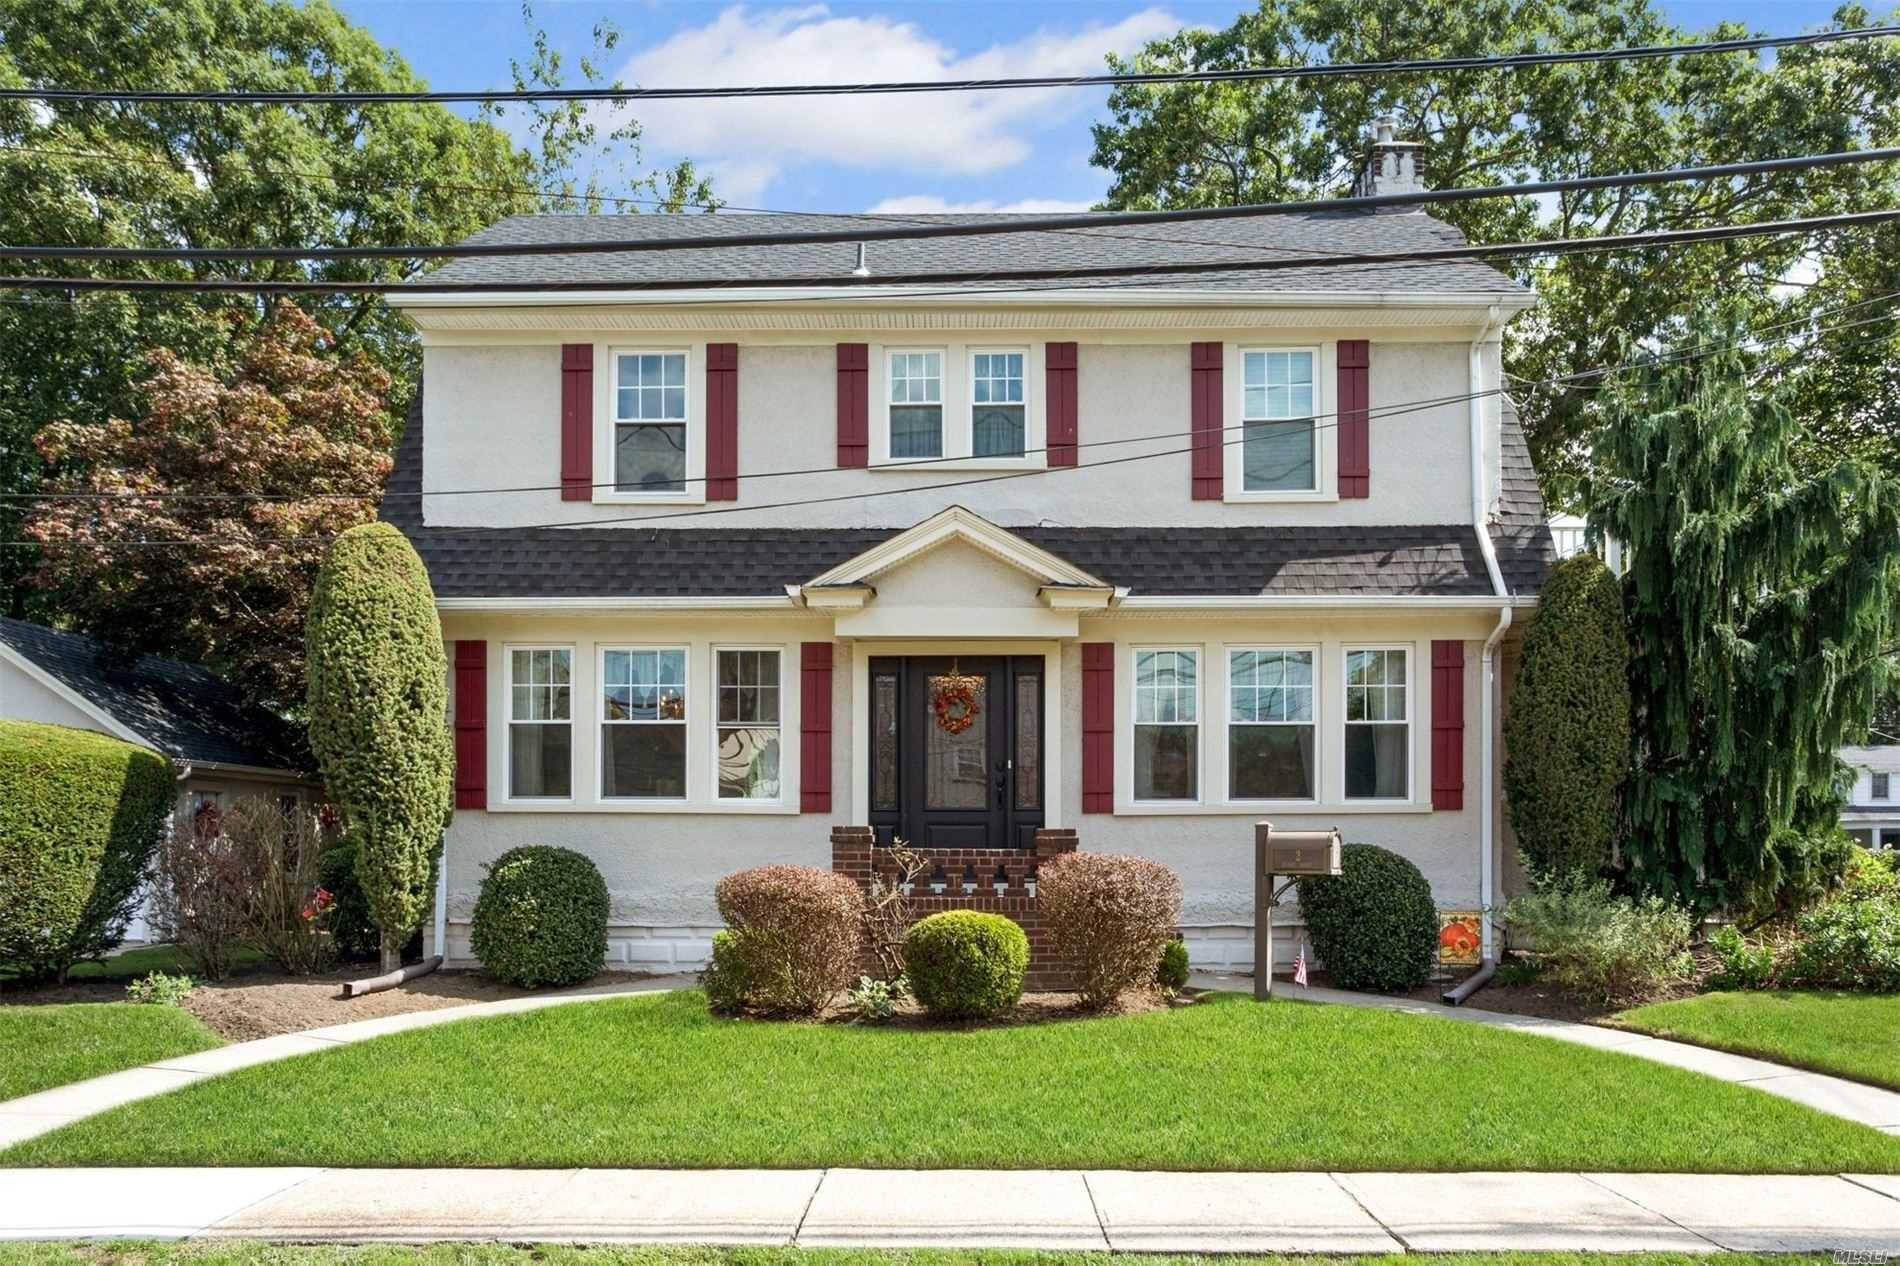 Spacious, sunny and elegant Colonial on a very quiet block.